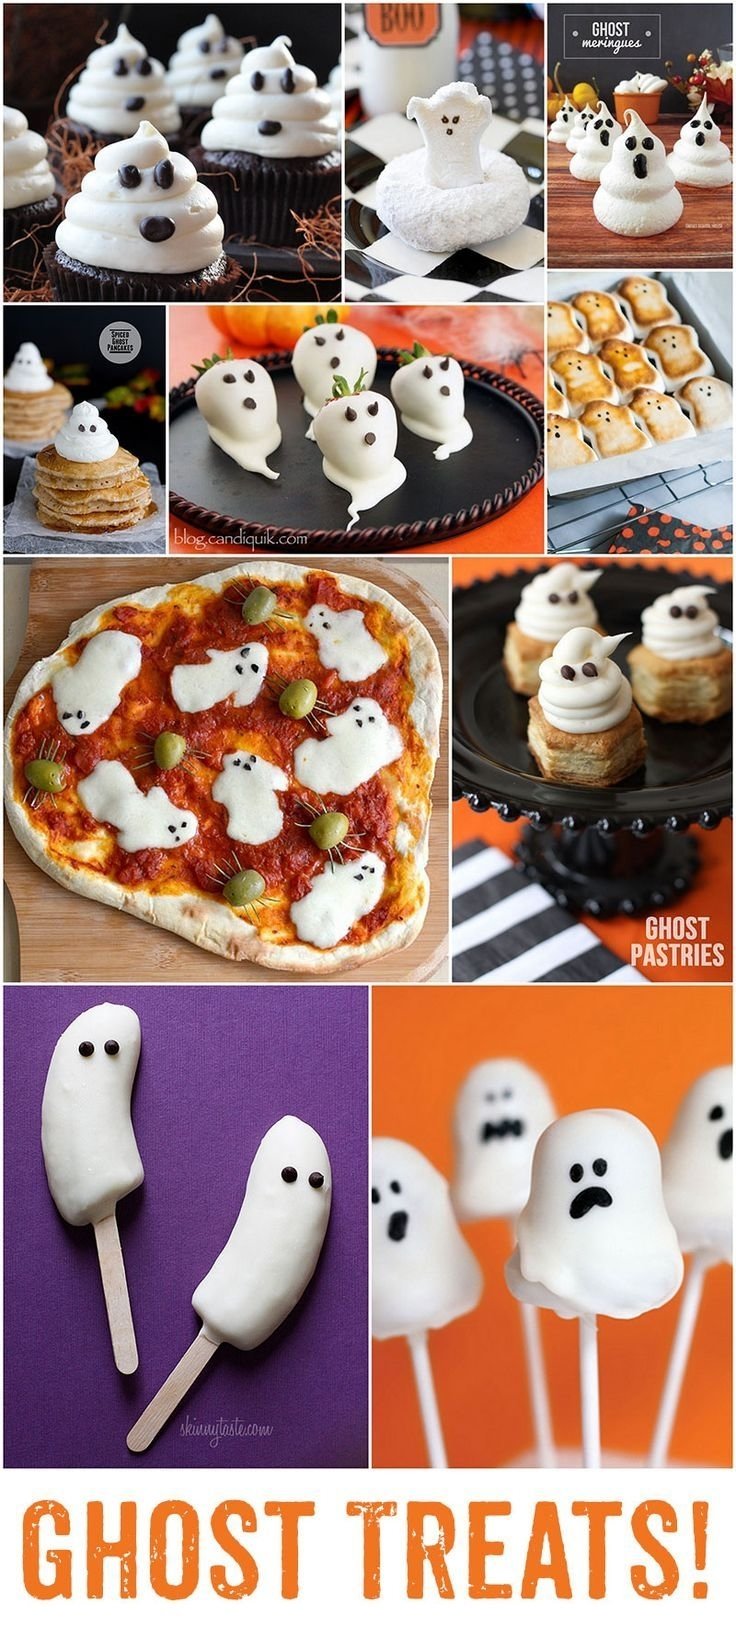 10 Nice Ideas For A Halloween Party 629 best halloween party ideas images on pinterest halloween prop 6 2023